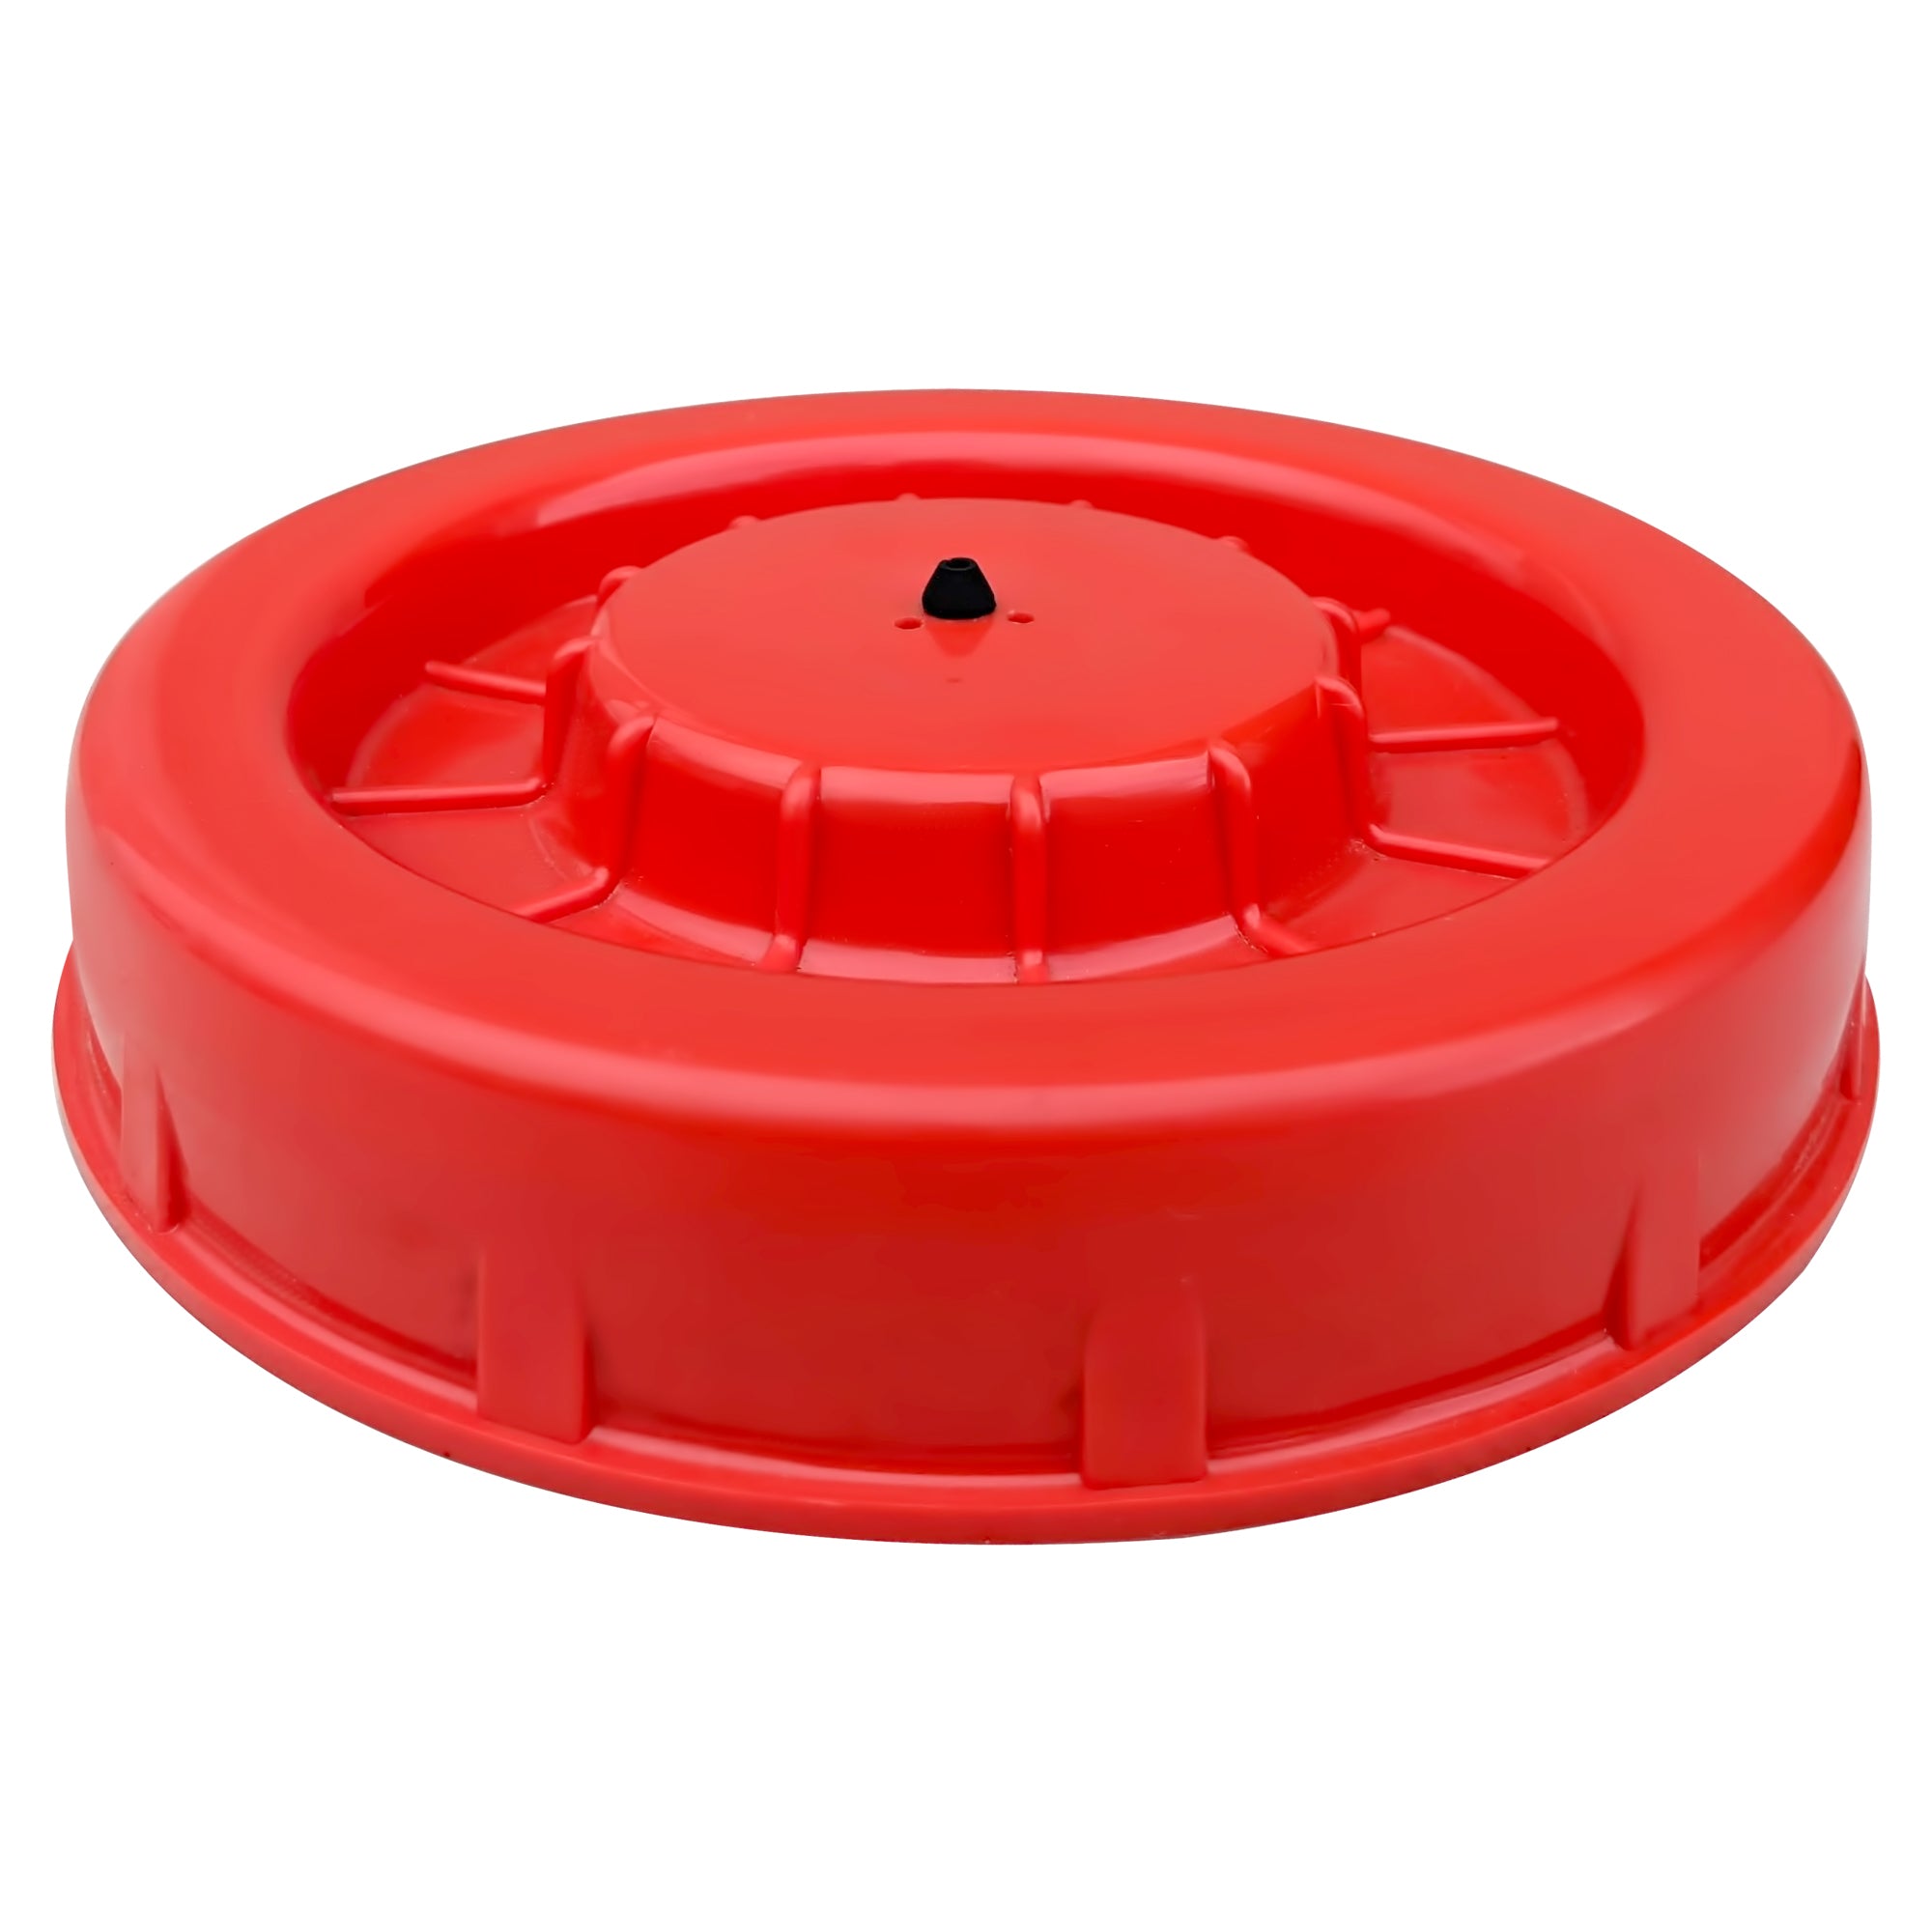 TGS30 Lid with Gasket (3WF-3.17.1-2)